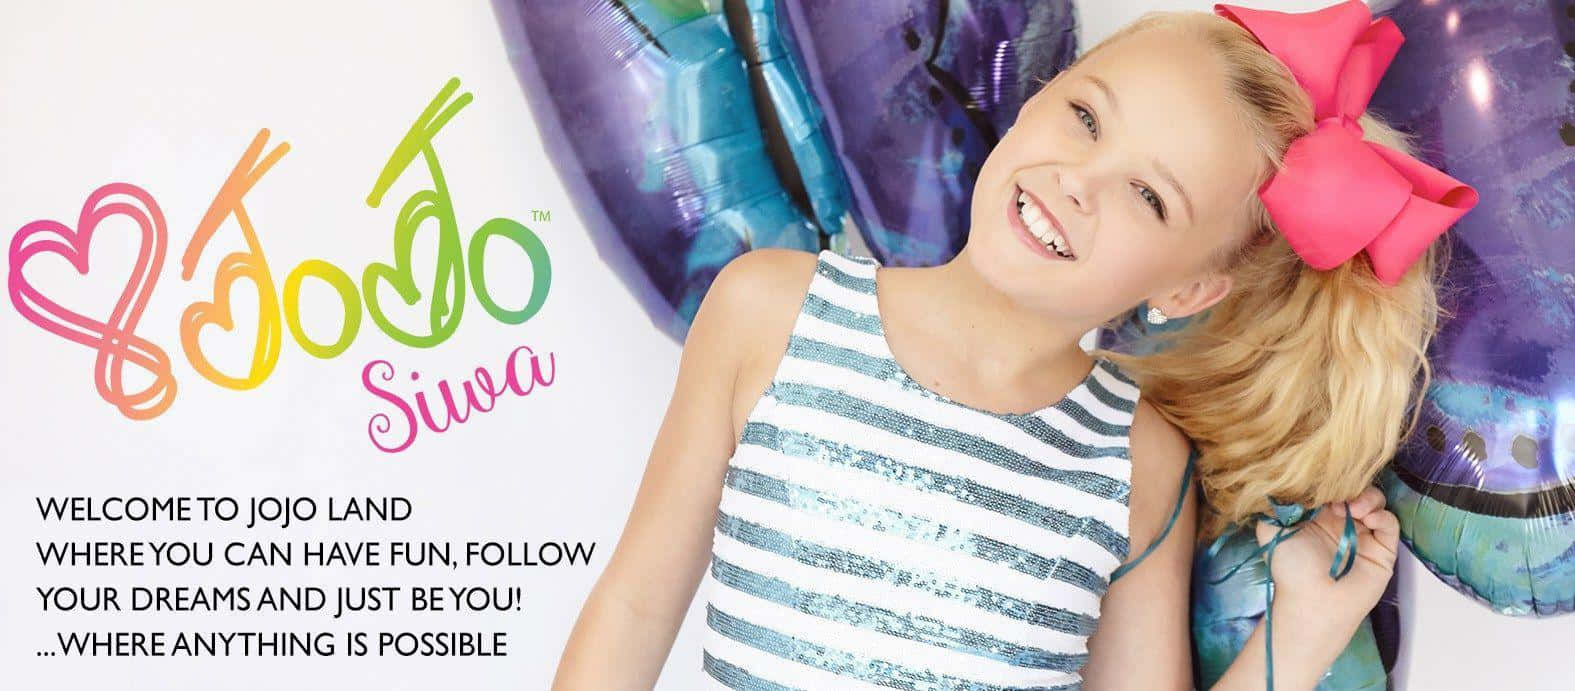 Jojo Siwa lights up the stage in her signature style